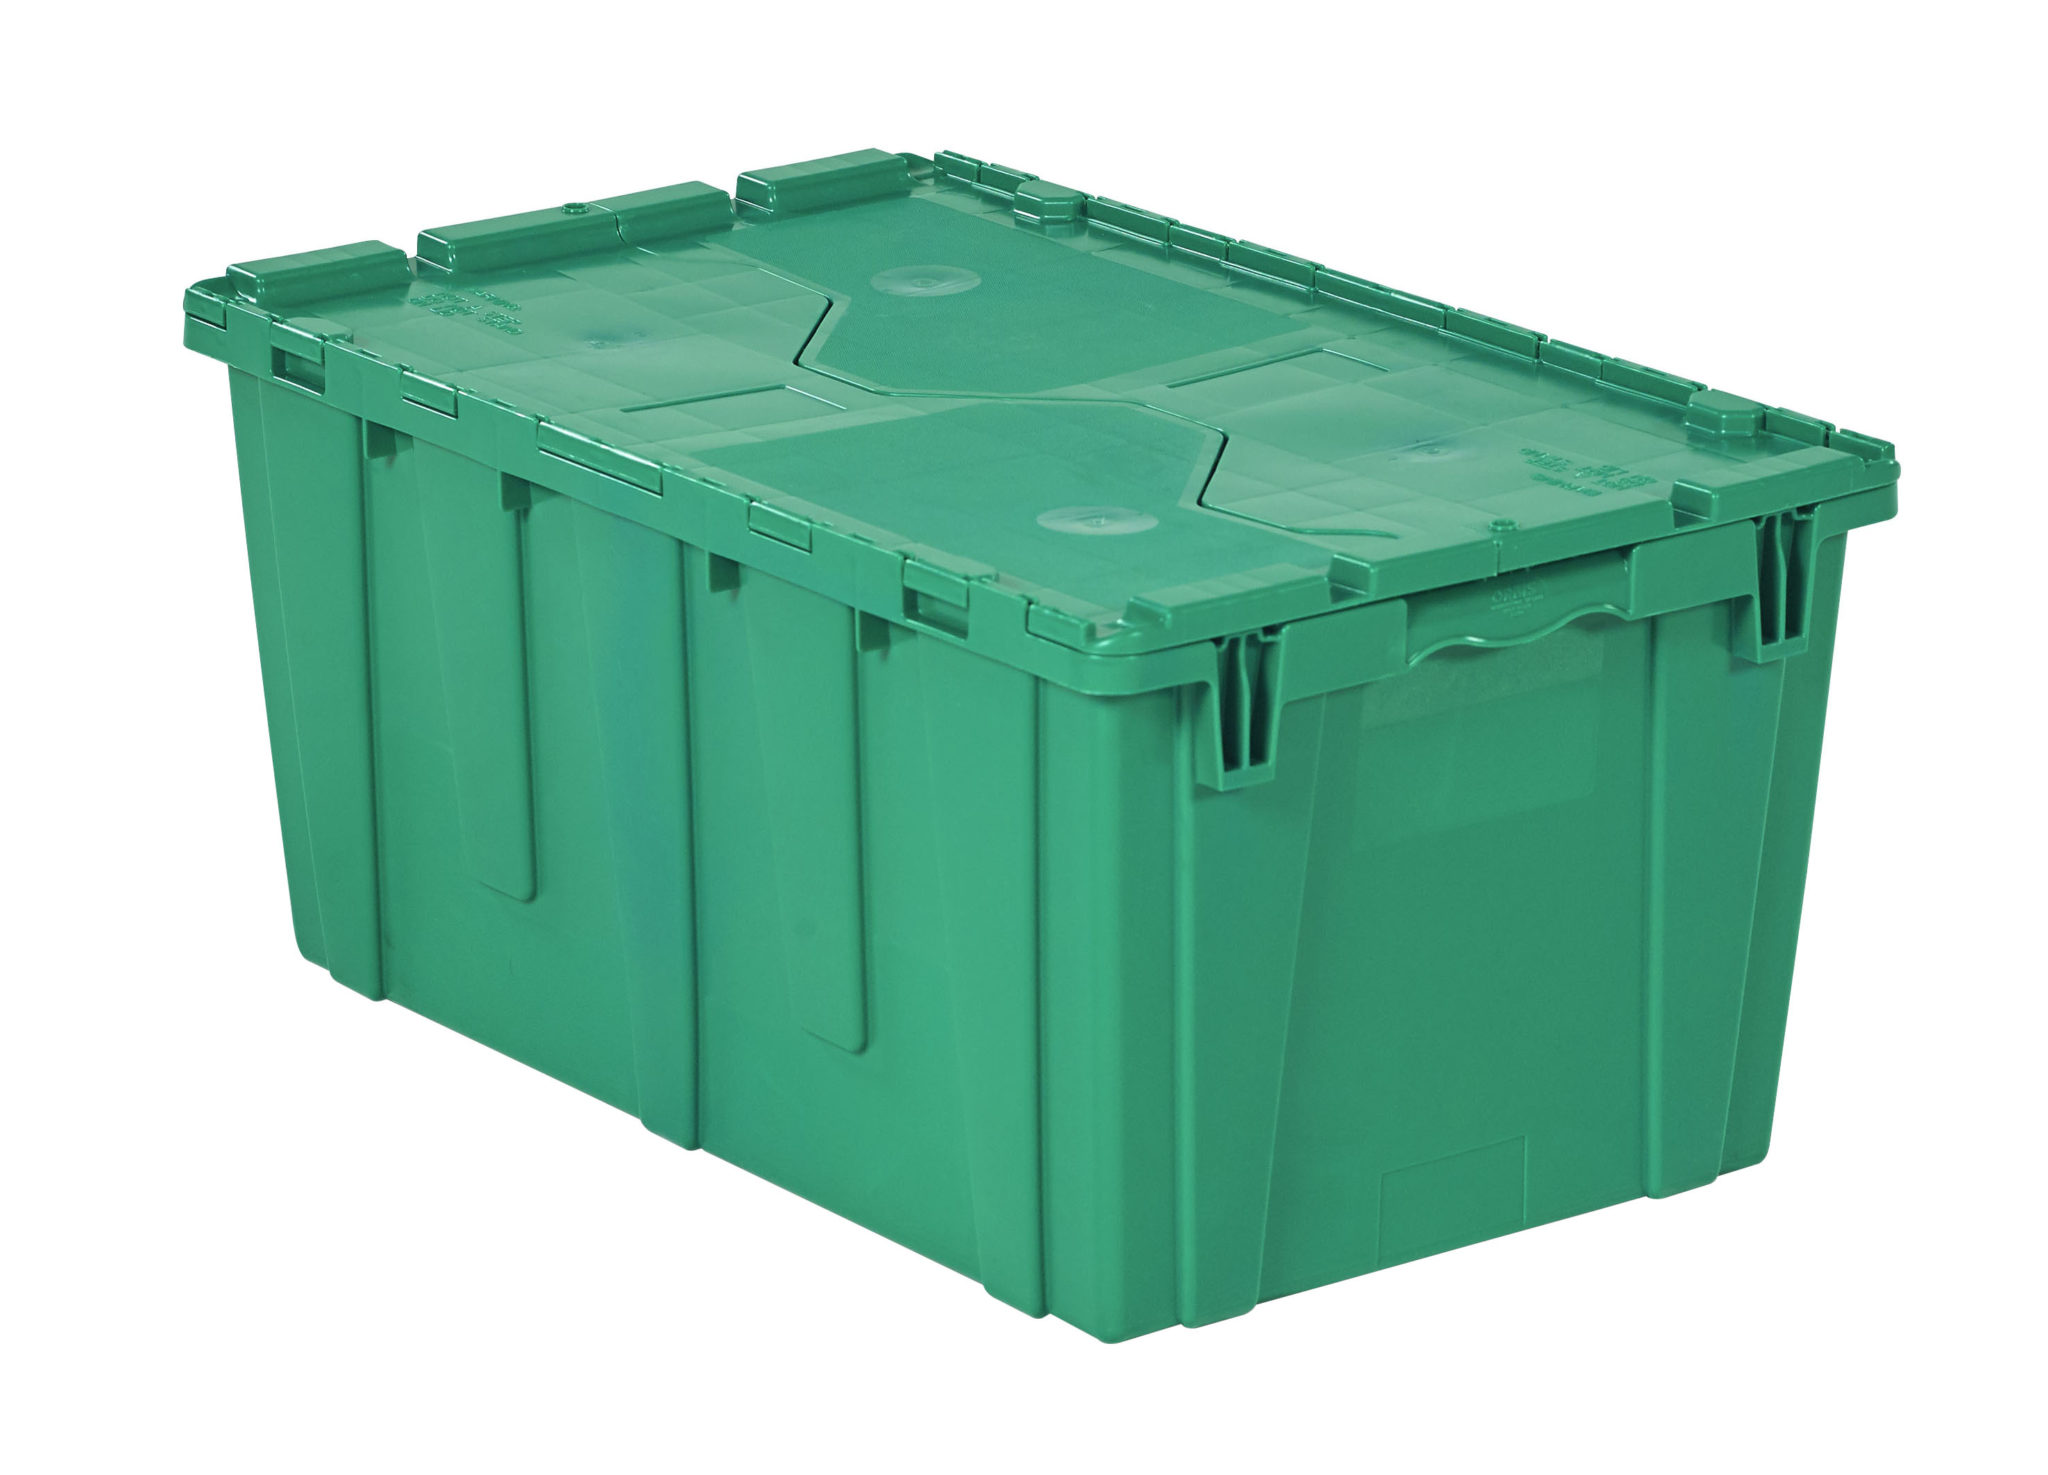 27 x 17 x 13 – Handheld Attached Lid Container